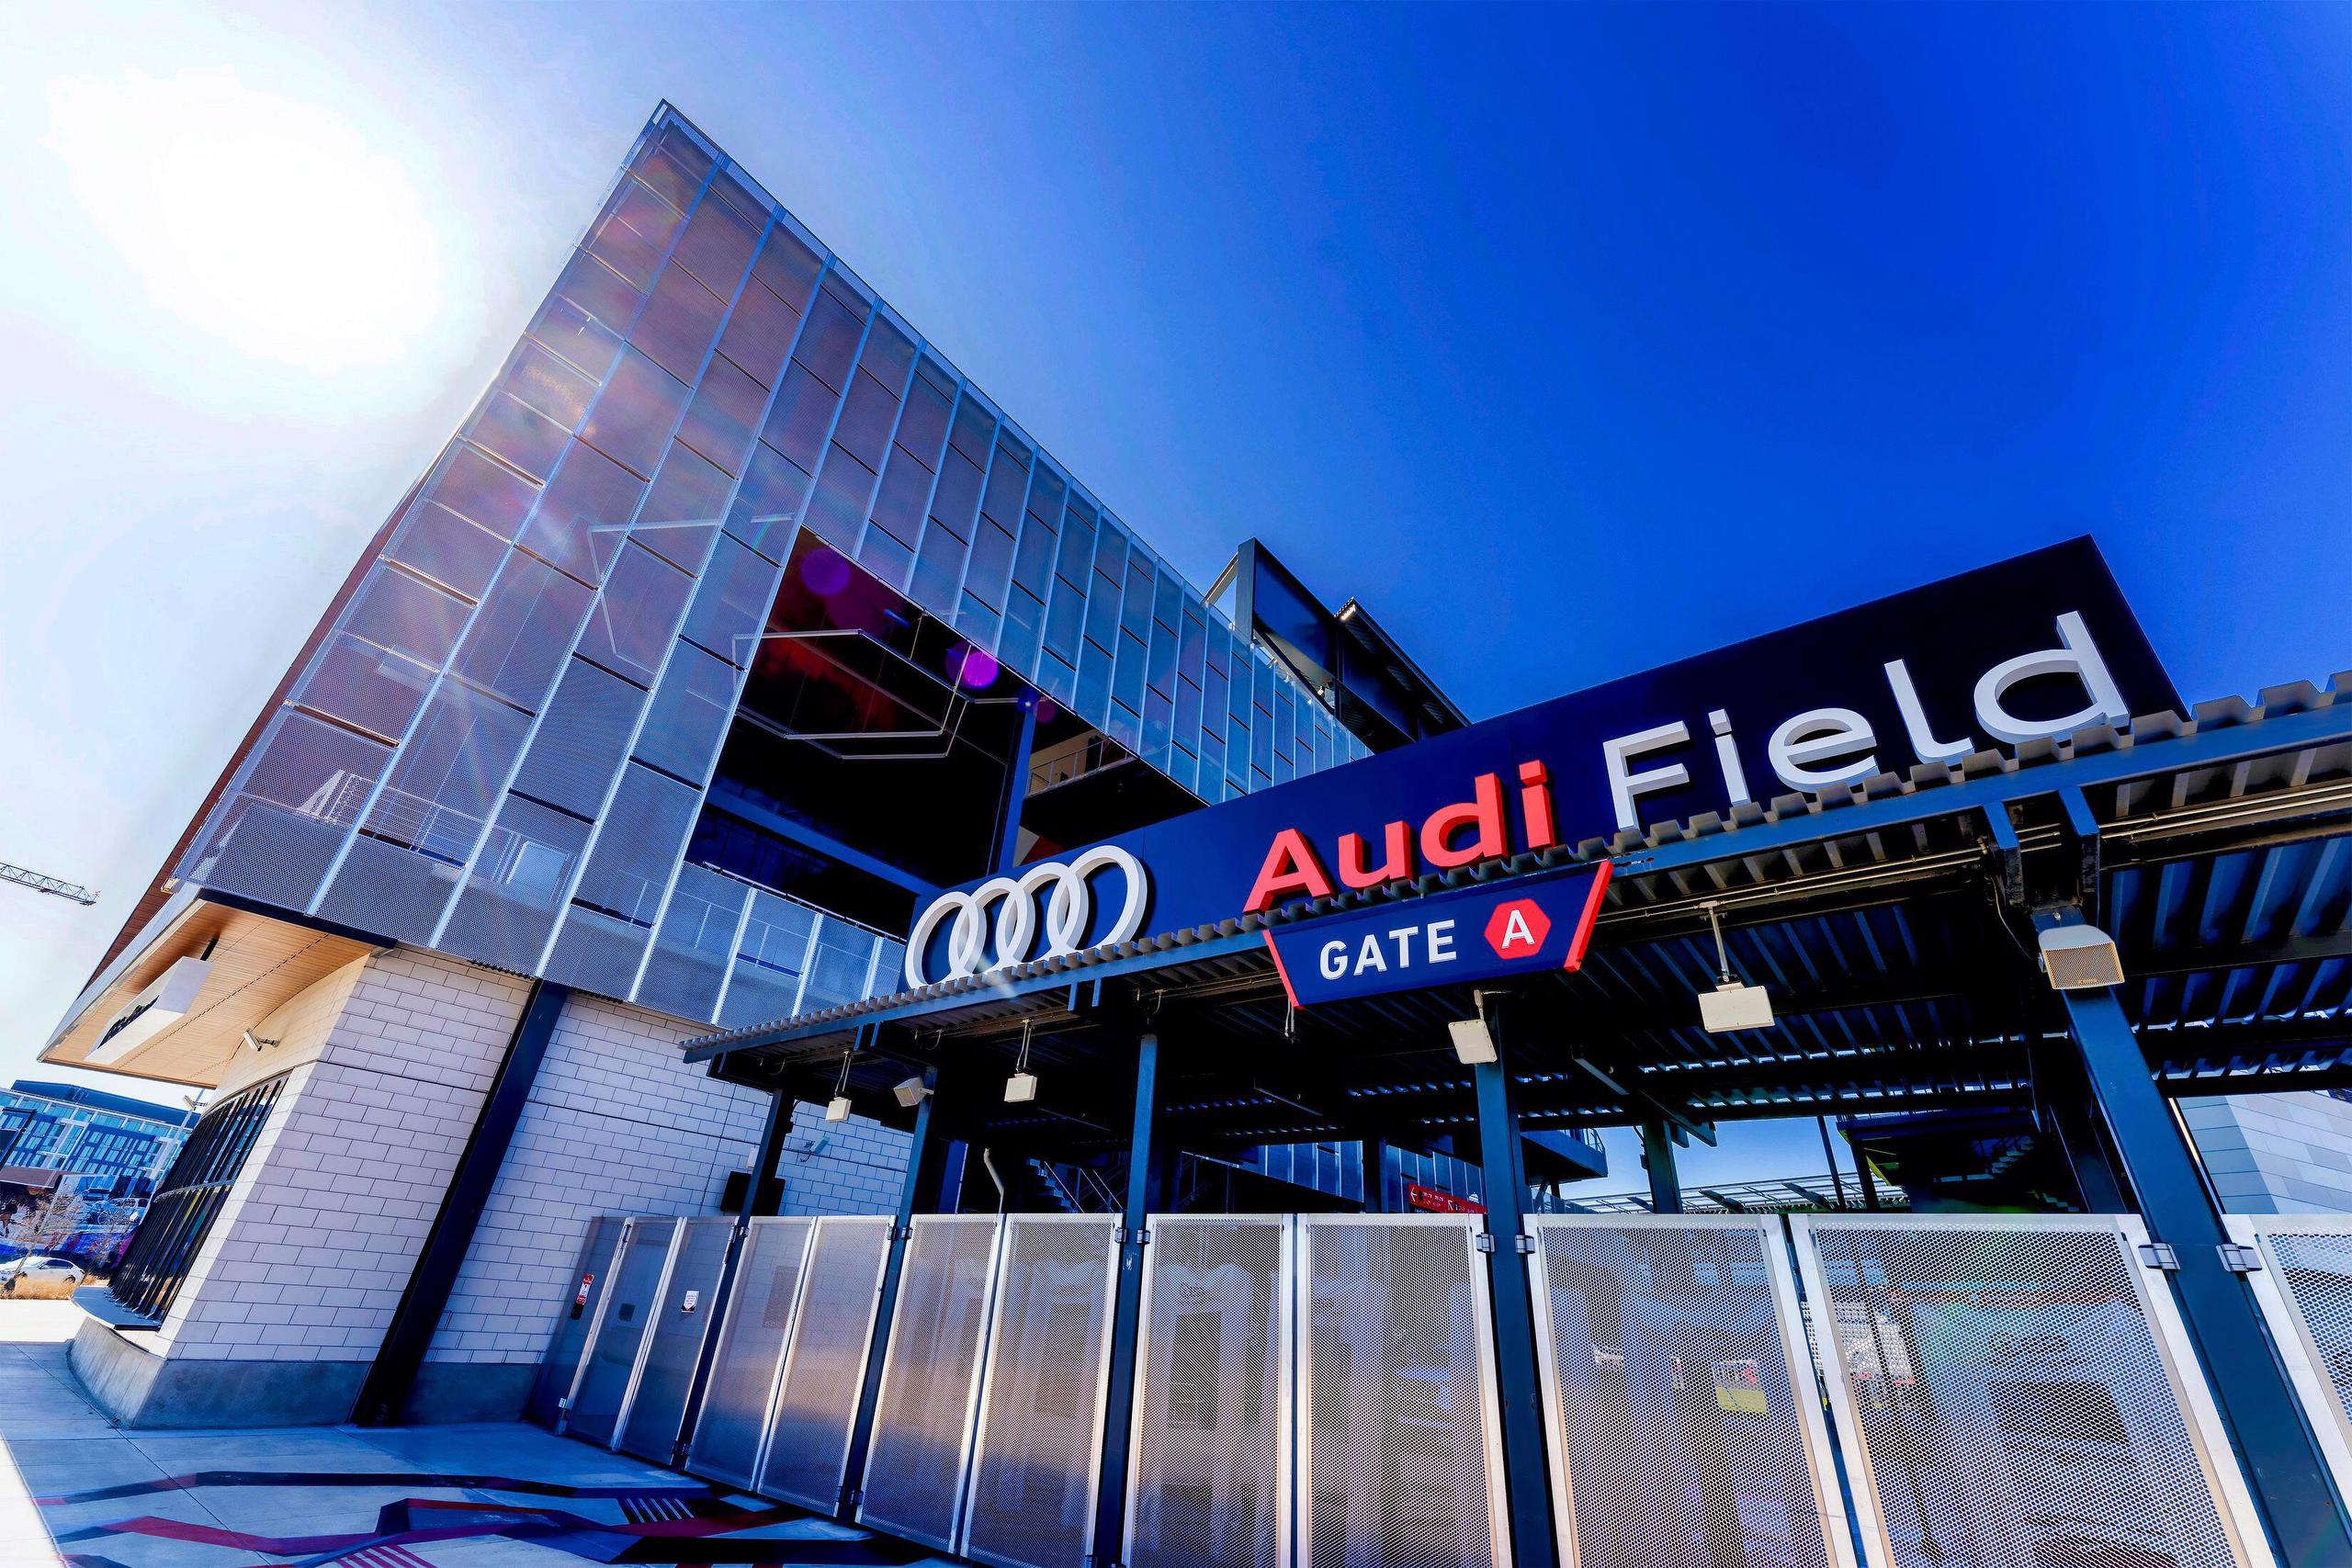 Audi Field Perforated Metal Facade & Fencing